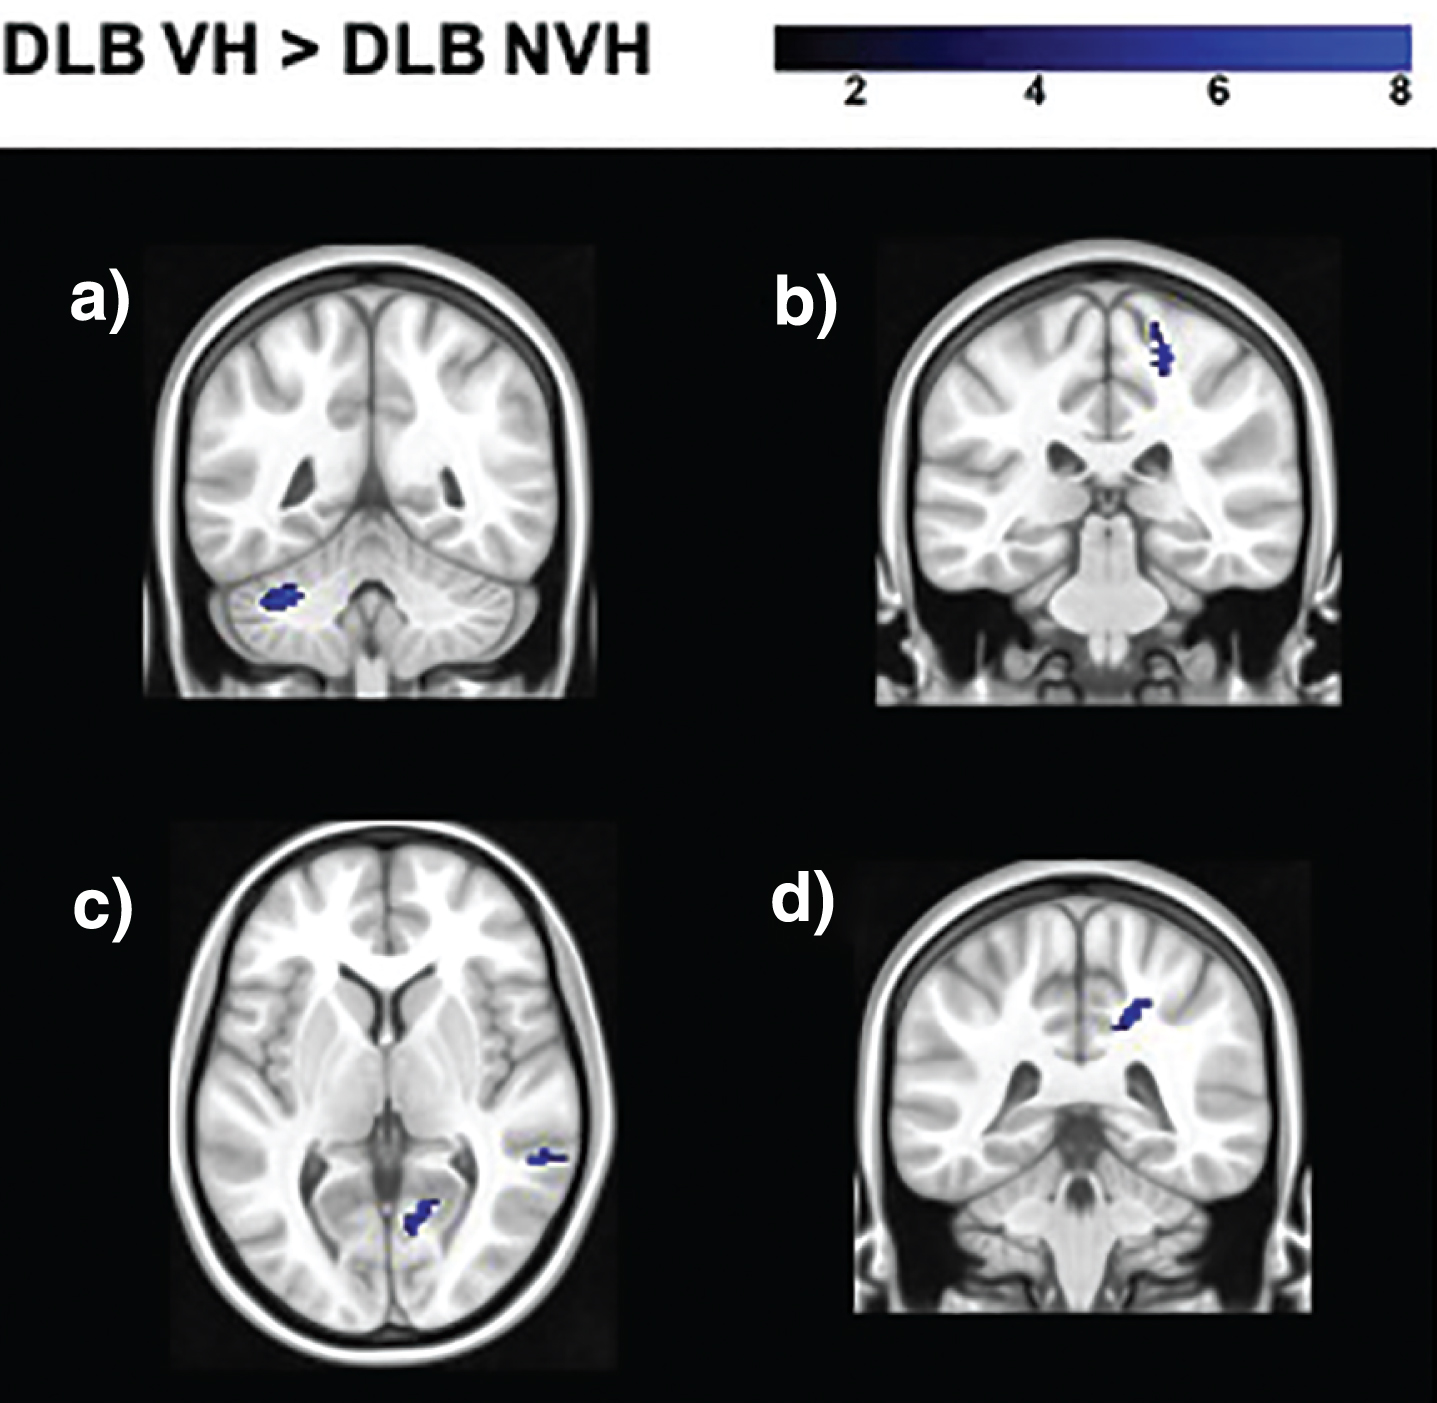 Regions of increased functional connectivity in DLB patients with VH compared to those without obtained in the analyses of the following seeds: a) right superior parietal lobule (BA 7); b) right secondary visual cortex (BA 18); c) right lateral geniculate nucleus; d) right putamen. The color bar indicates the z scores with the cluster-level threshold of p < 0.05 Family-Wise Error corrected for multiple comparisons with total intracranial volume and age as covariates of no interest.